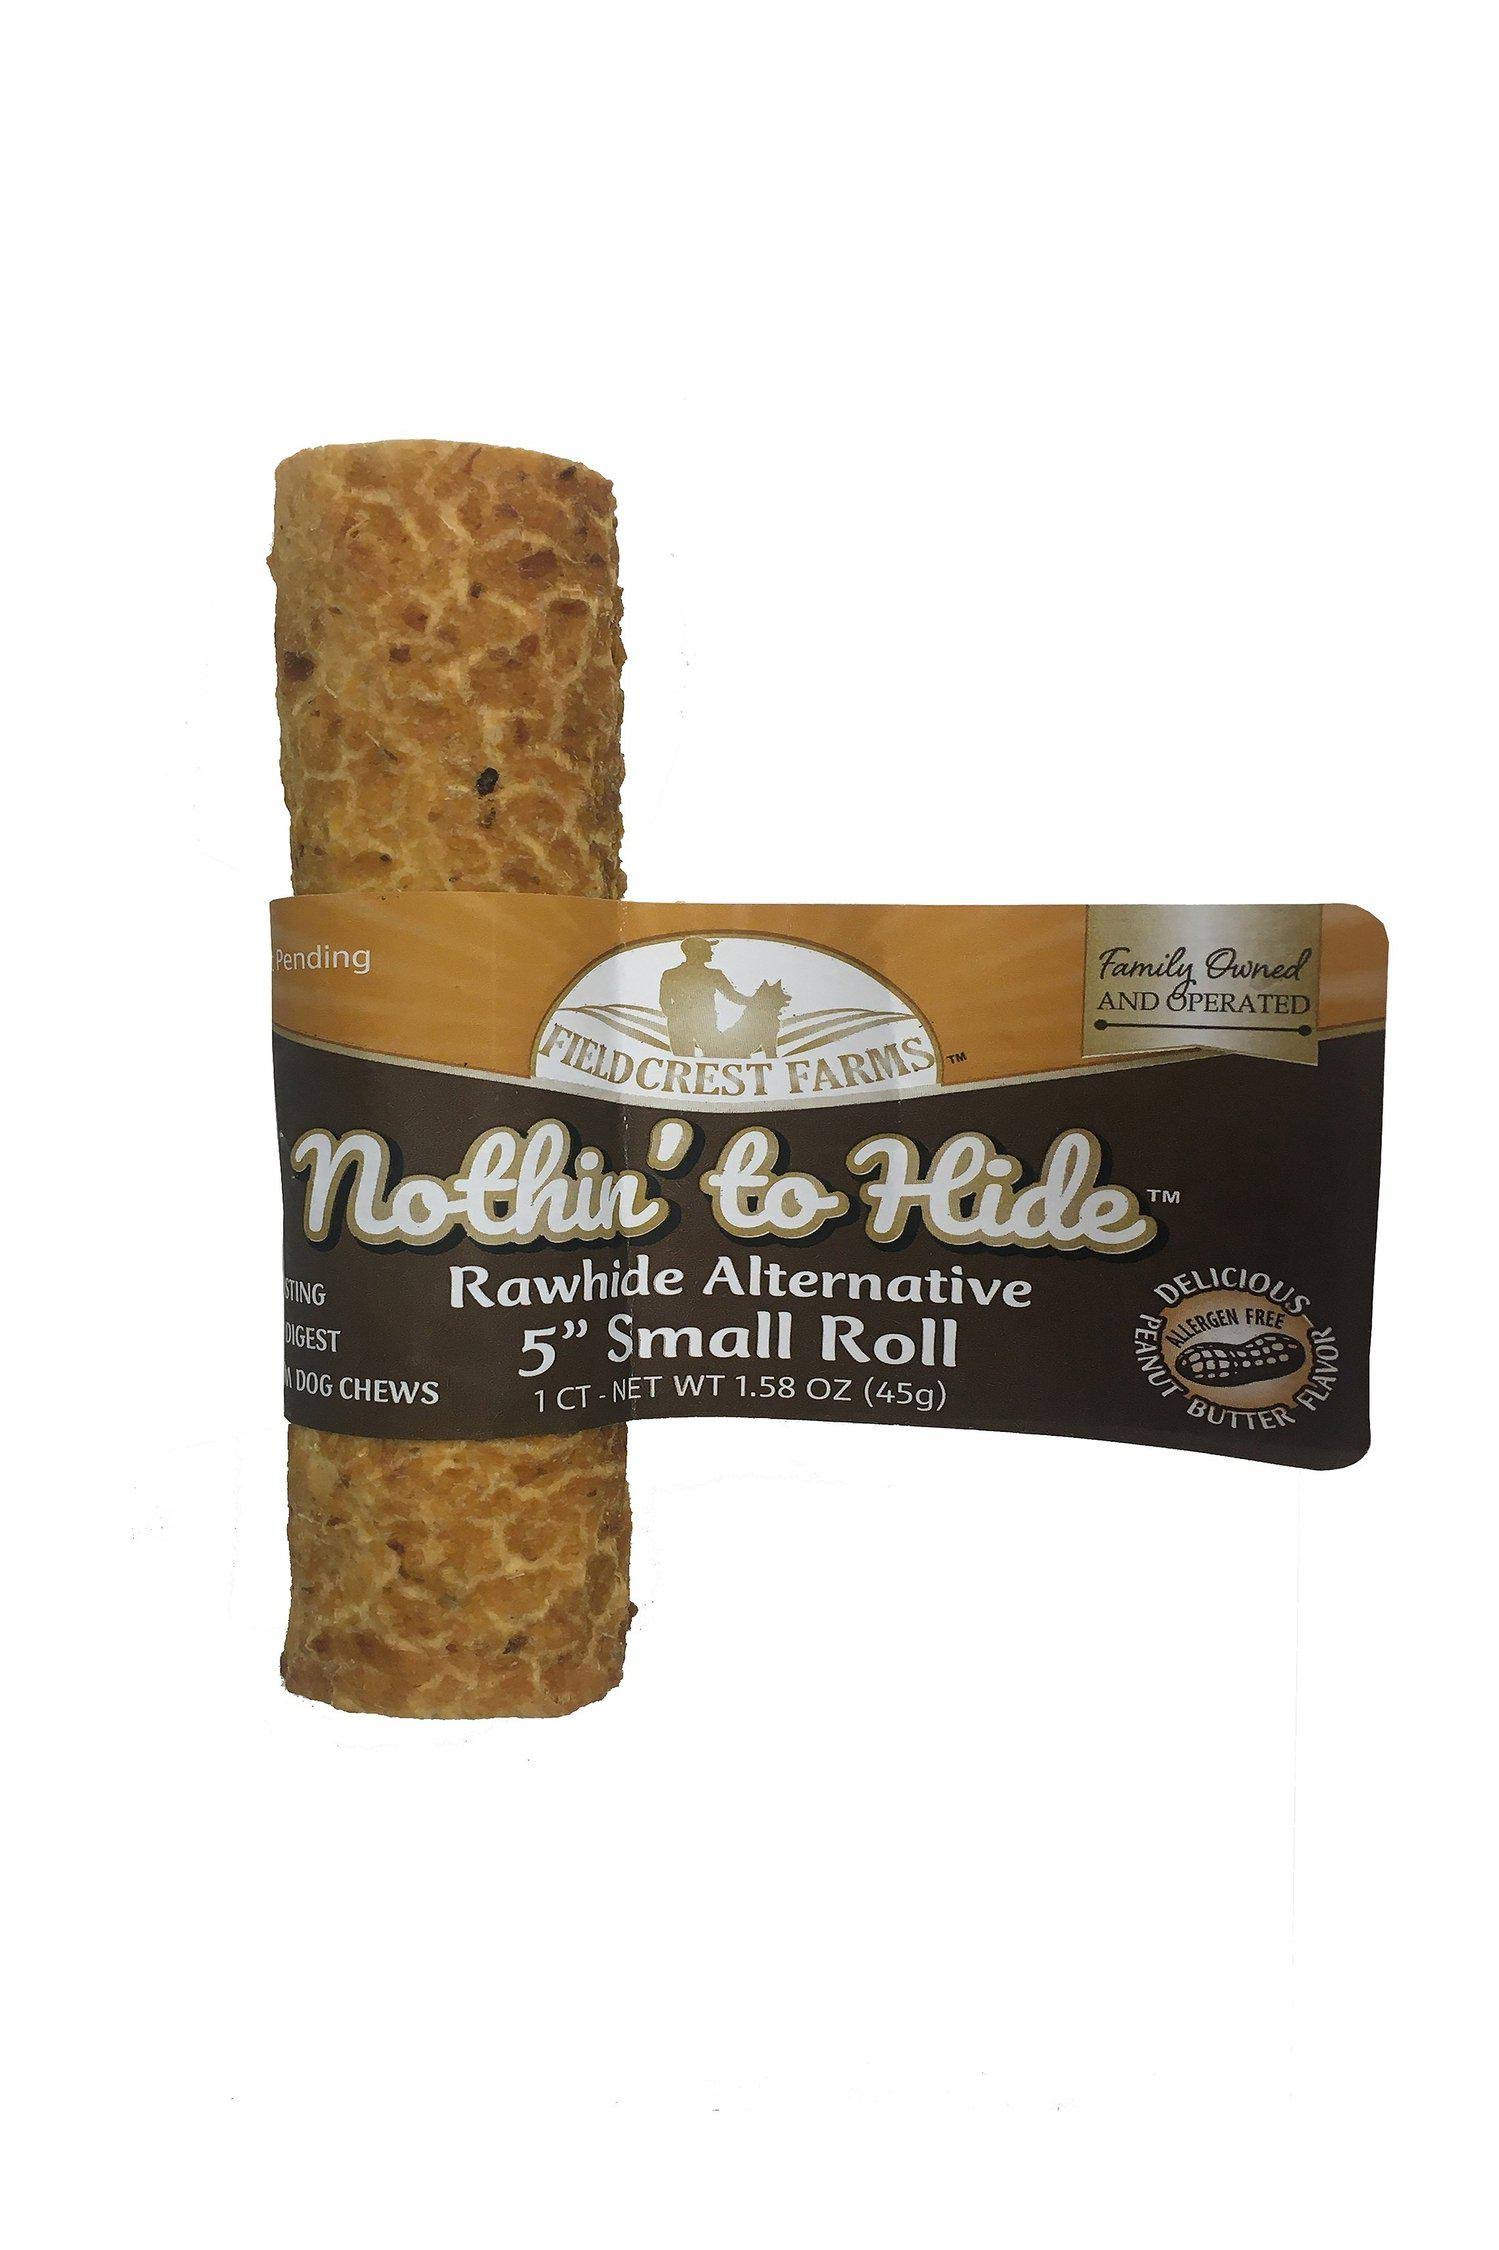 Nothin' to Hide Peanut Butter Roll 5" Small